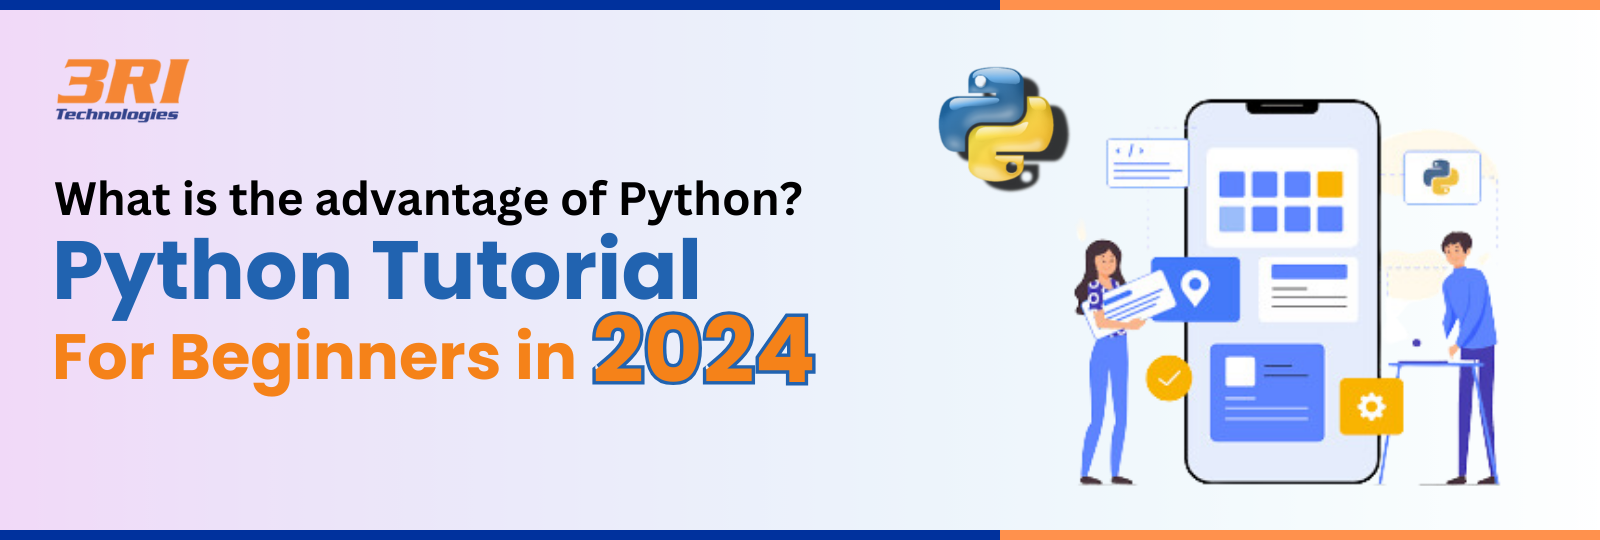 Python Tutorial for Beginners in 2024